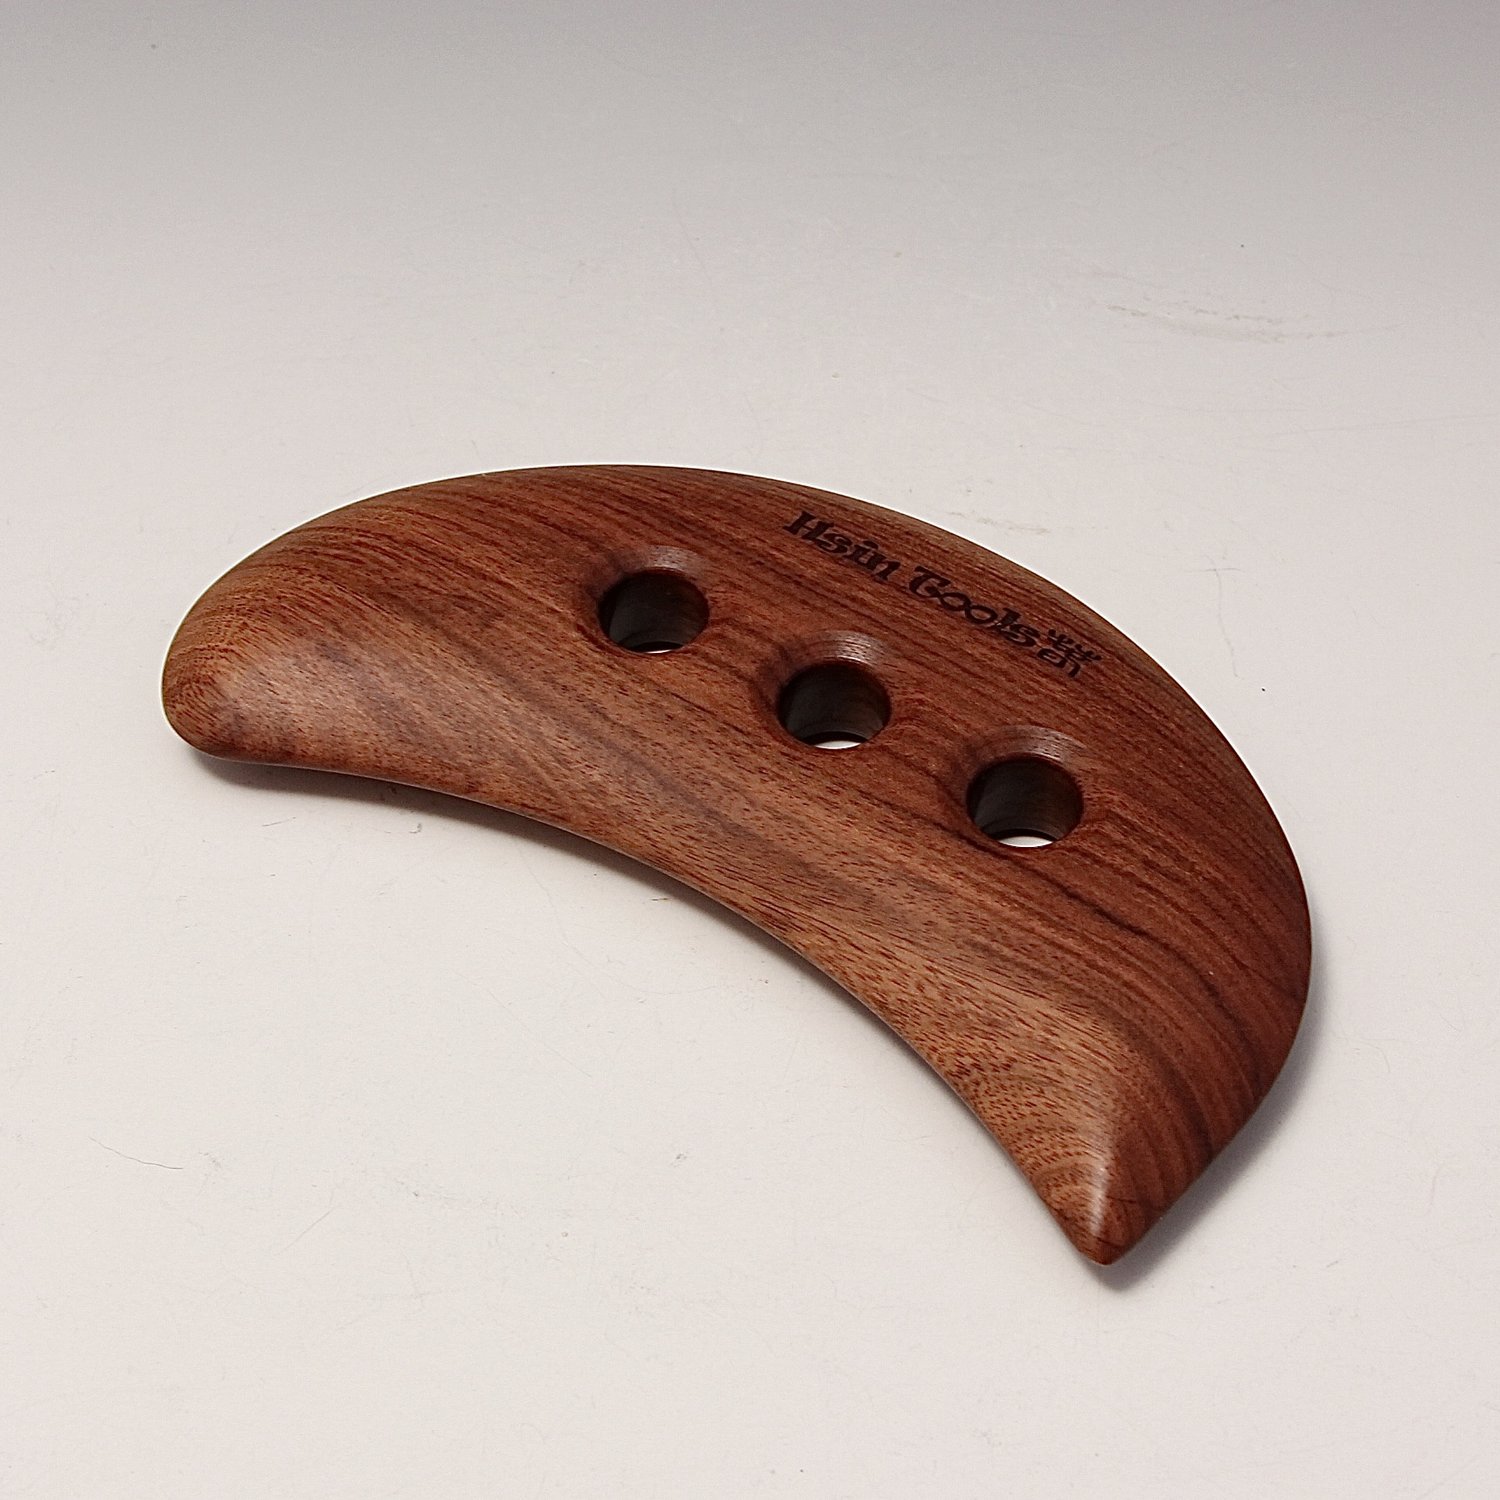 Pear-Shaped Tungsten Carbide Loop Tool with Large Walnut Wooden Handle~ The  Hardest Pottery Trimming Tool Designed by Hsin-Chuen Lin — Hsin-Chuen Lin  Ceramics & Tools